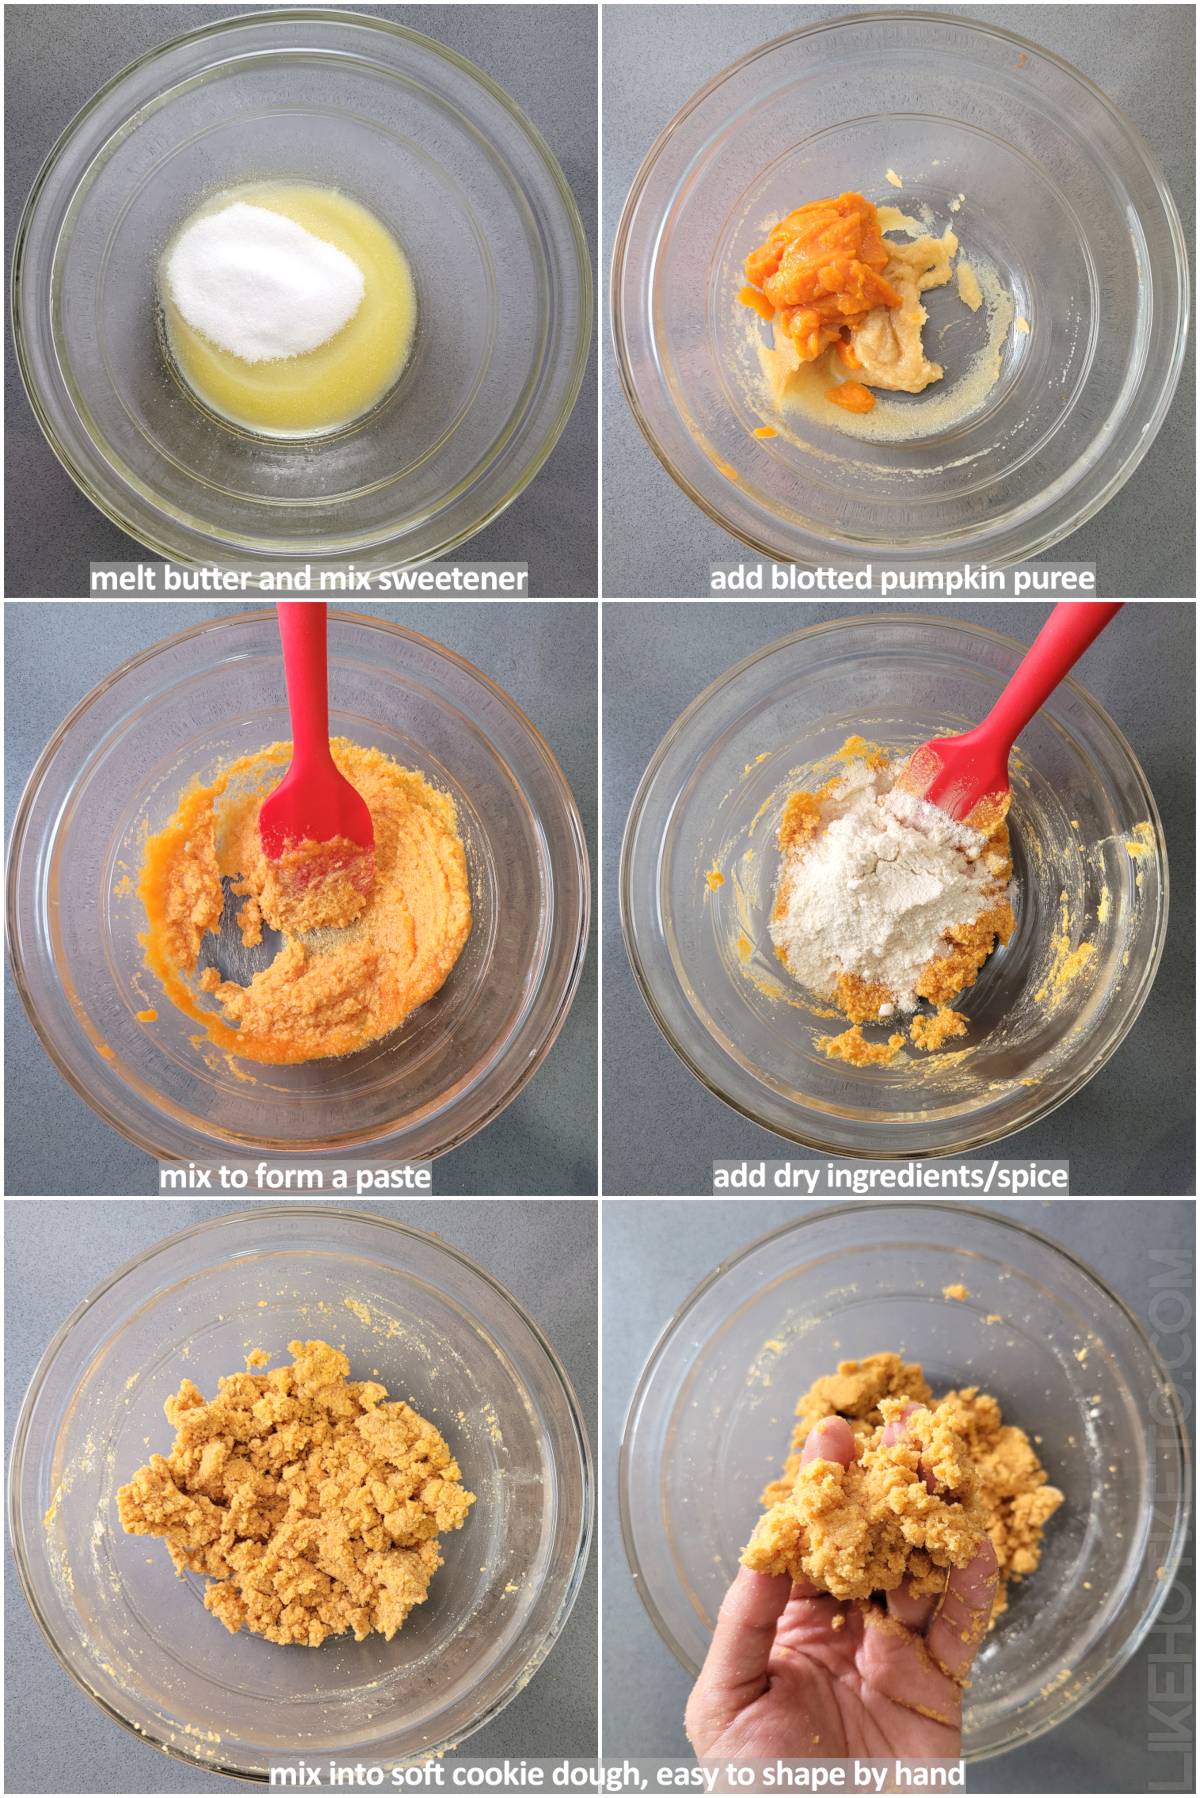 Step by step pictures of keto pumpkin cooking preparation: mixing sweetener and butter, adding pumpkin purée, then dry ingredients and mixing up to form the soft cookie dough.